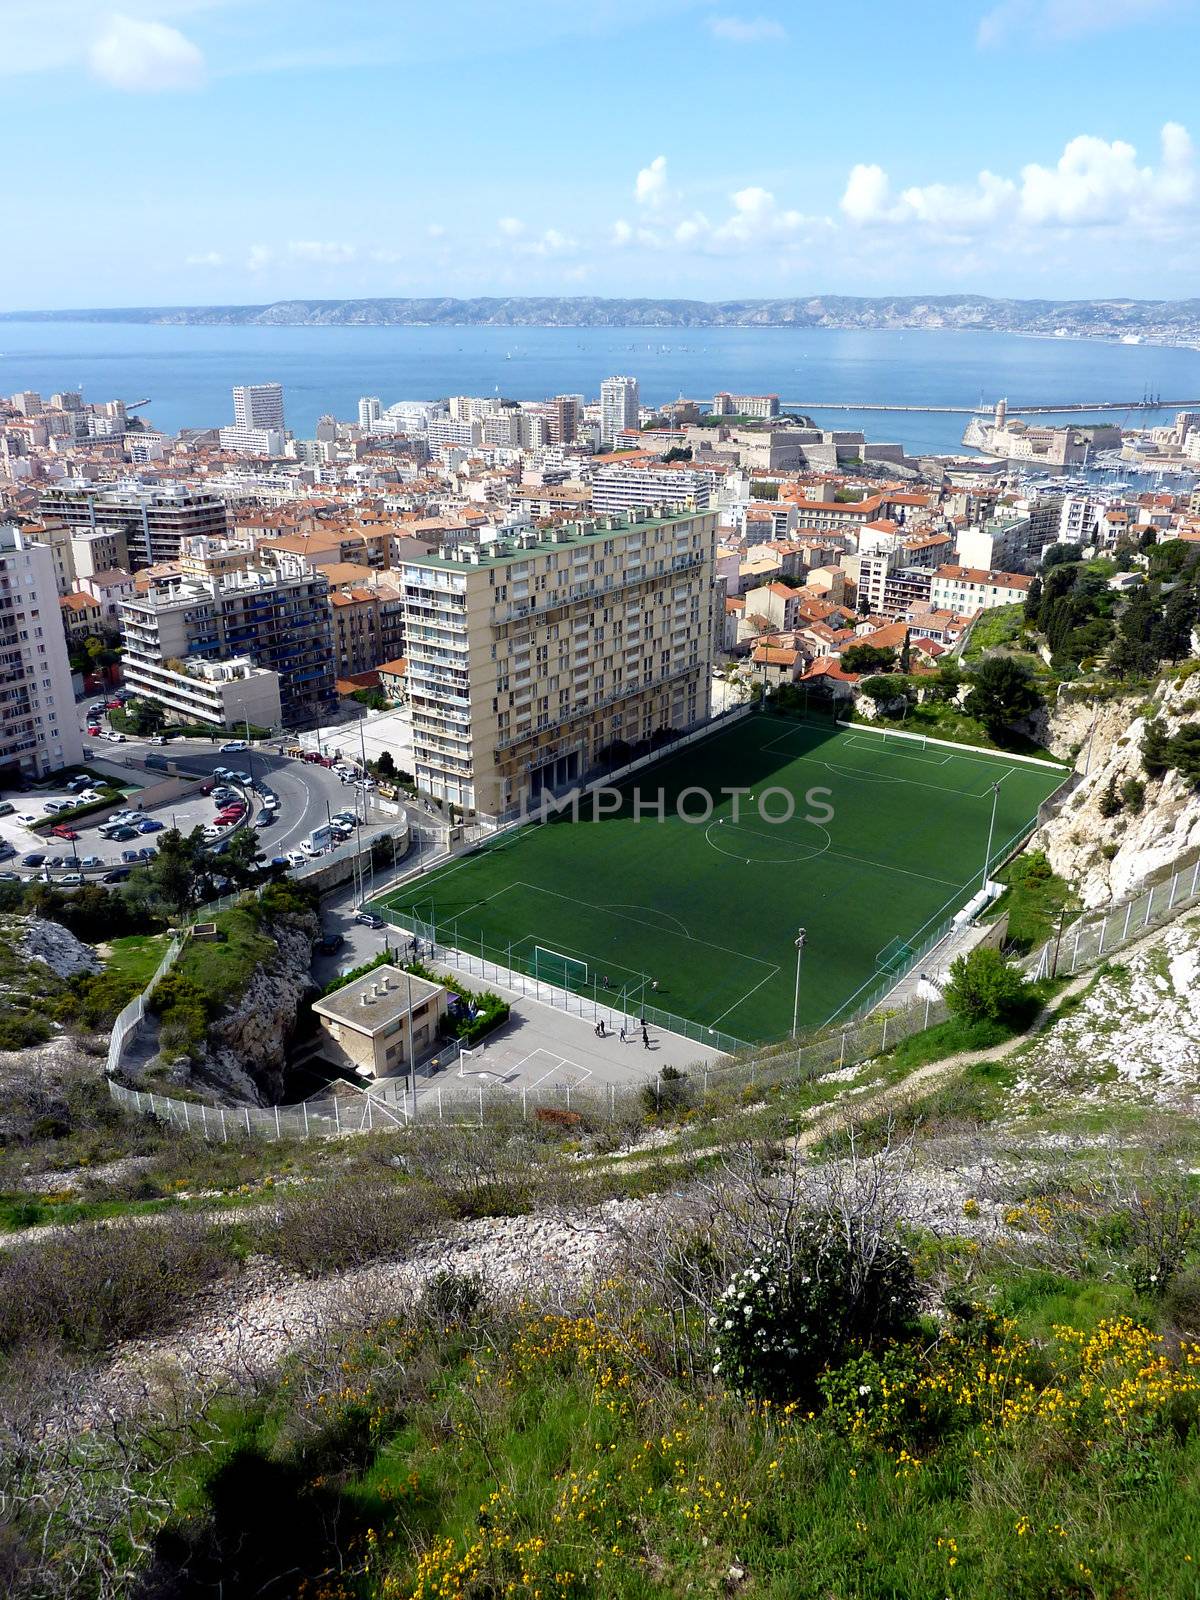 View of Marseilles city, France, with its buildings, the mediterranean sea and a football pitch by beautiful weather